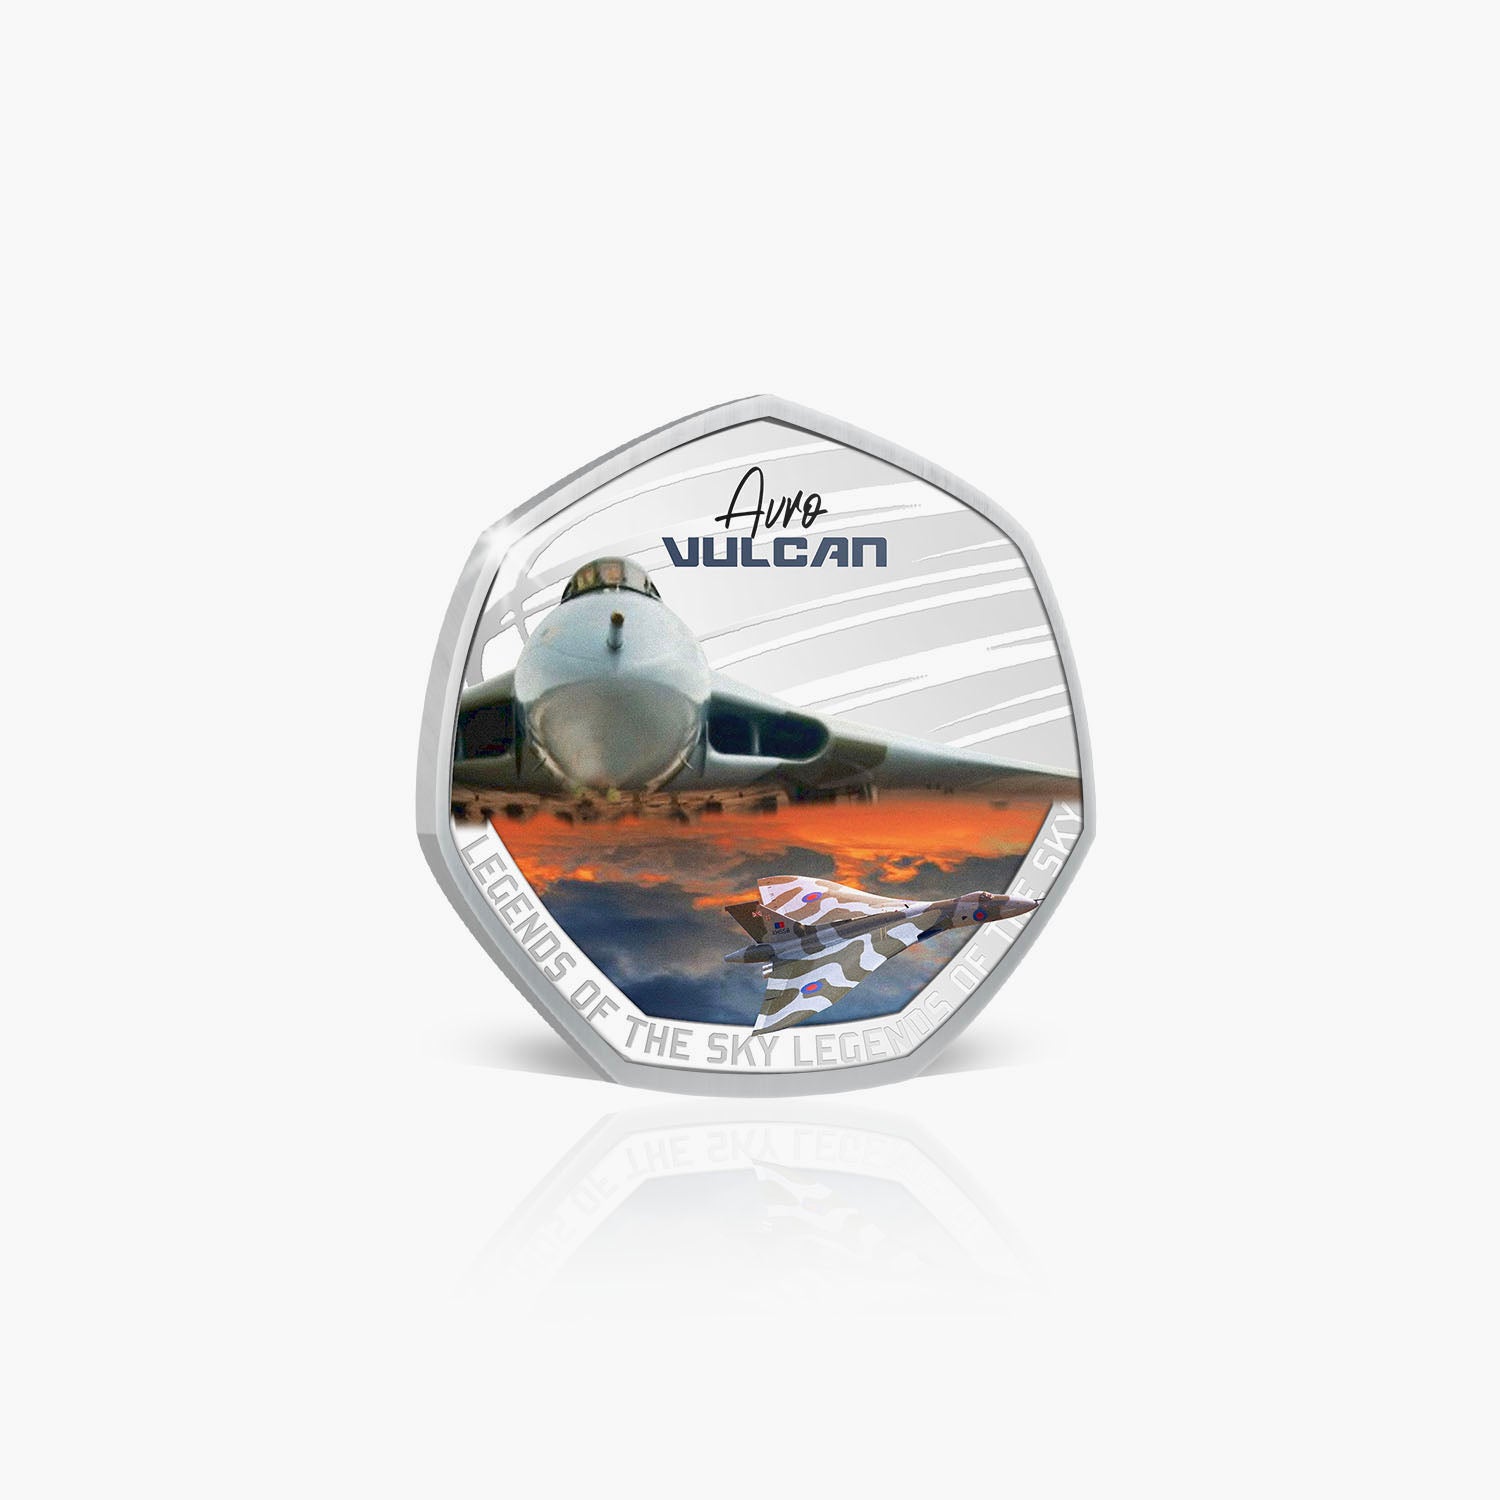 Legends of the Skies Vulcan Silver-Plated Commemorative